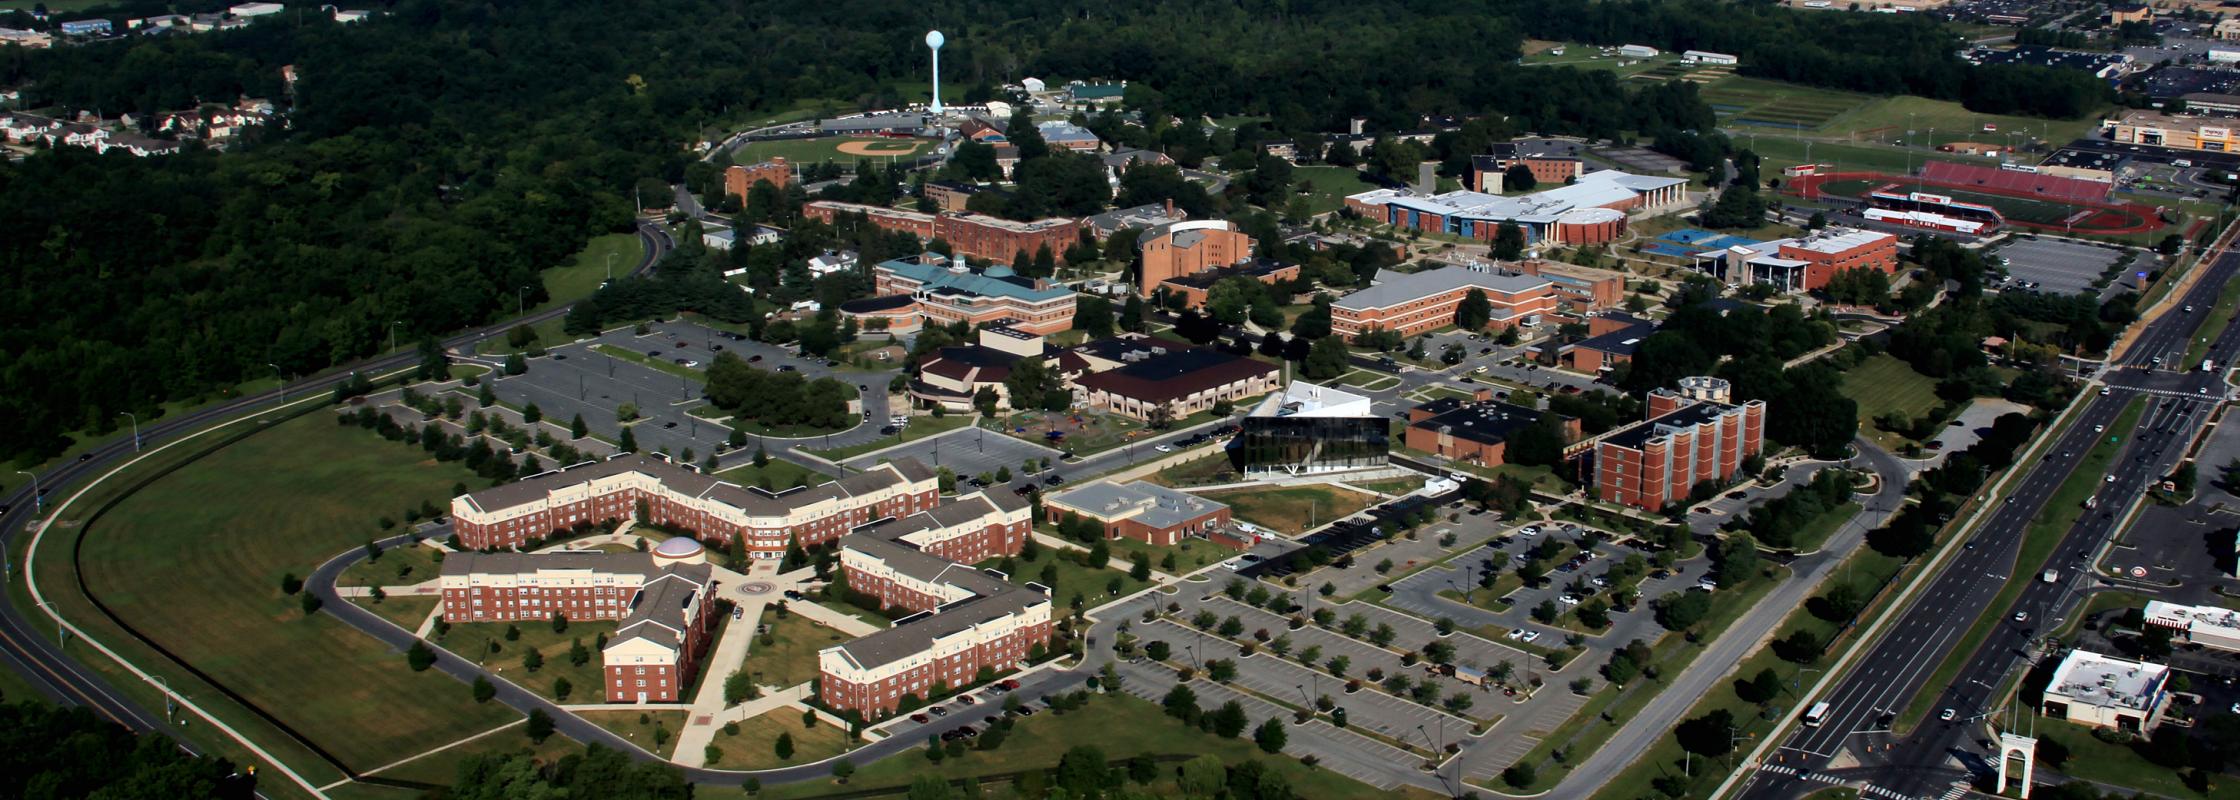 Aerial view of Delaware State University campus